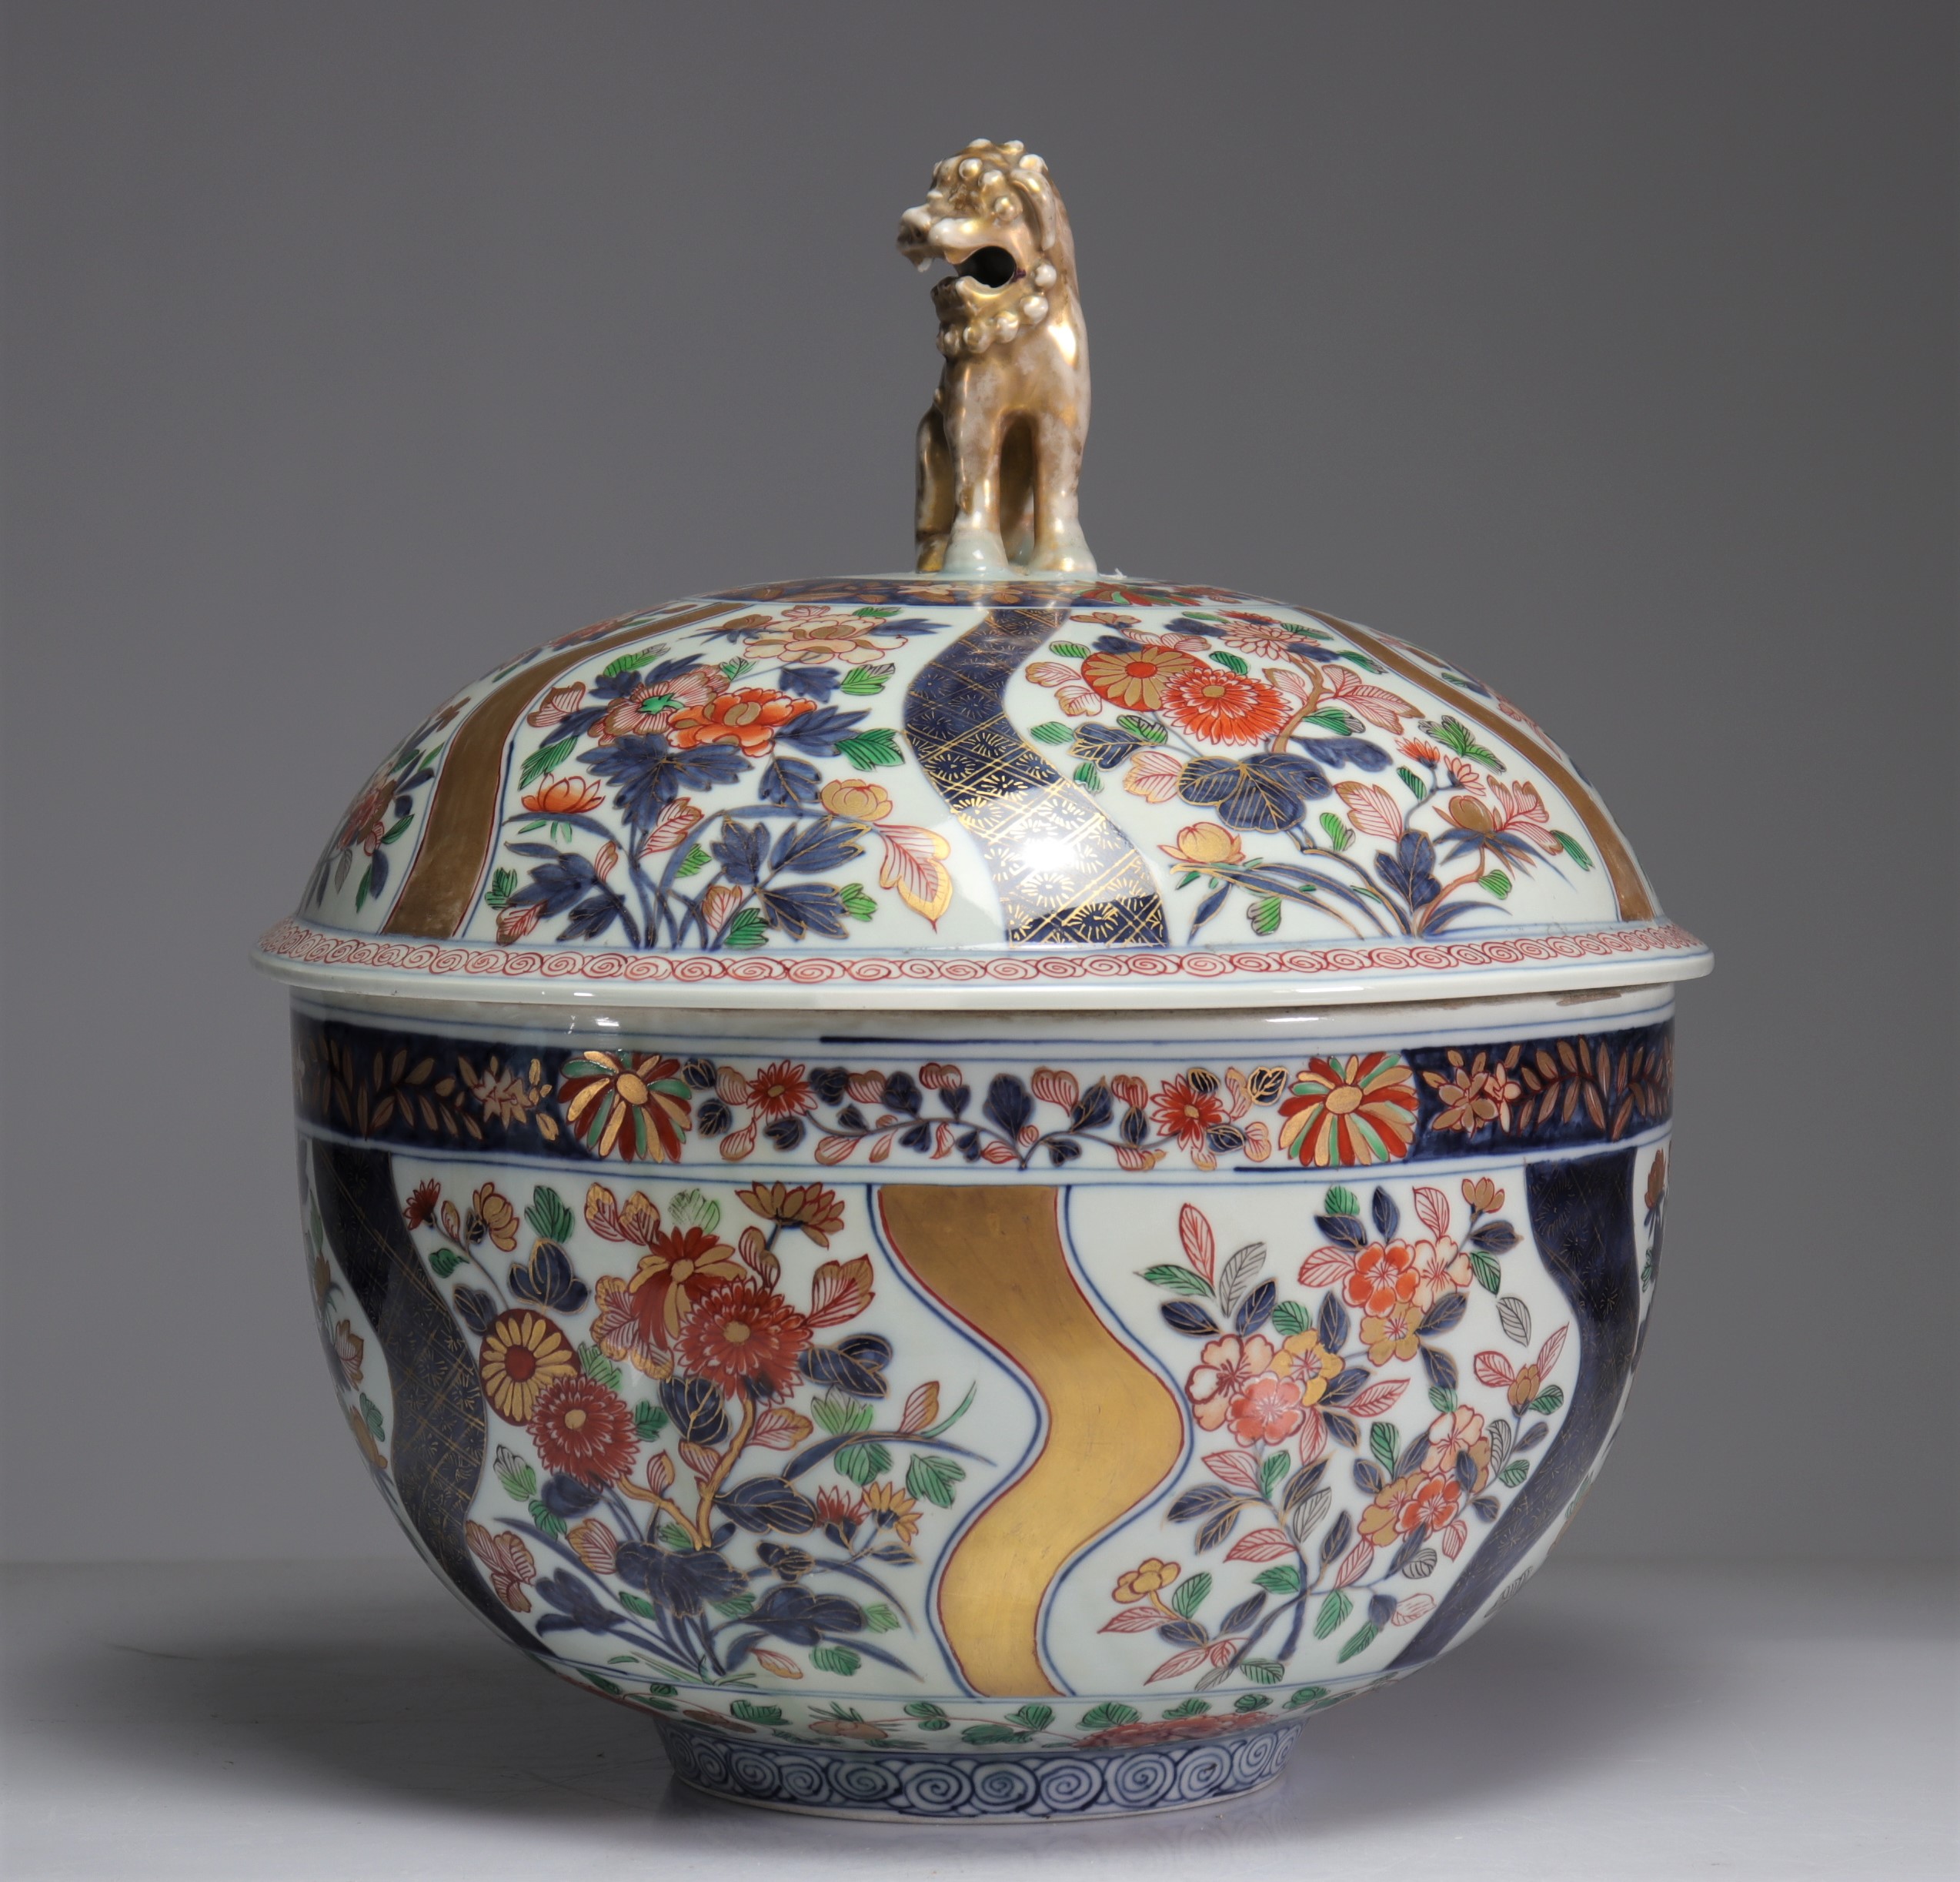 Imposing covered bowl in 18th century Japanese porcelain - Image 2 of 7